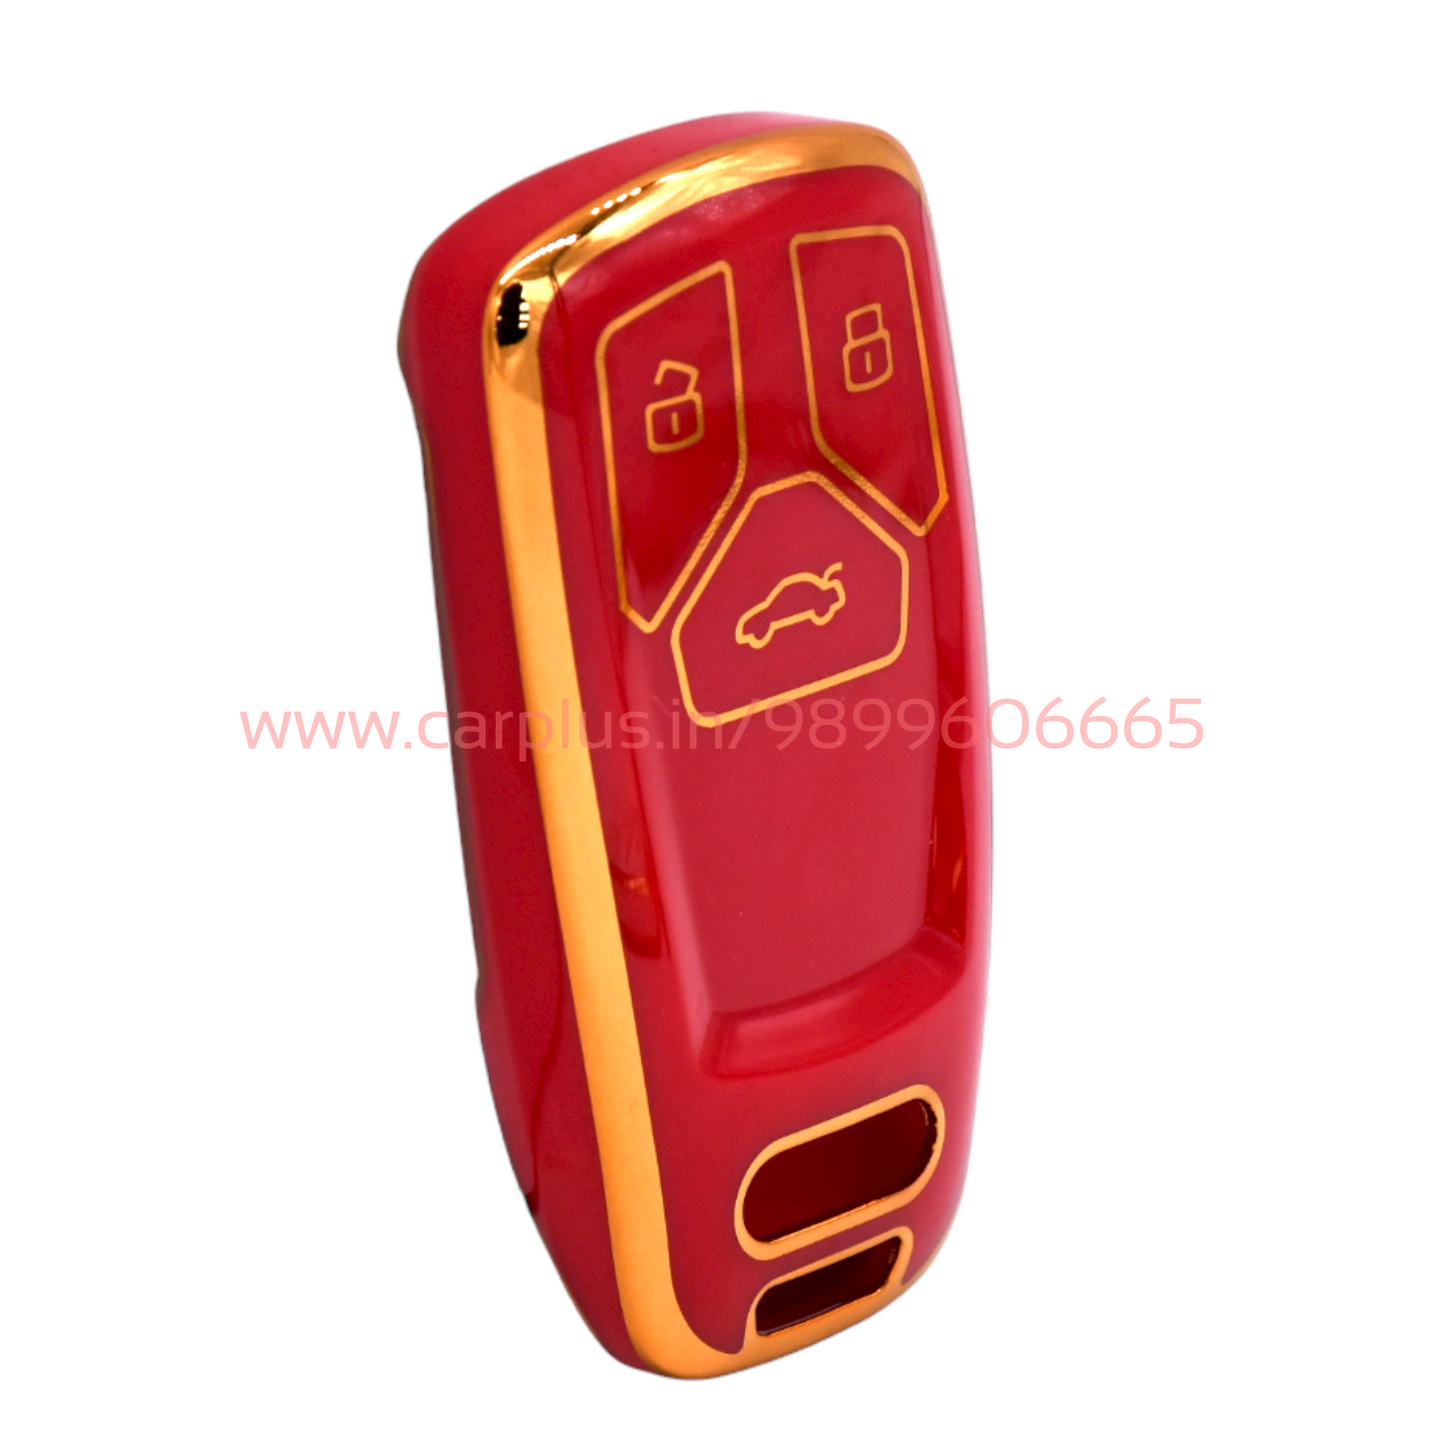 
                  
                    KMH TPU Gold Car Key Cover Compatible with Audi A4 TT TTS Q7 2016 2017 Key cover-TPU GOLD KEY COVER-KMH-KEY COVER-Red-CARPLUS
                  
                